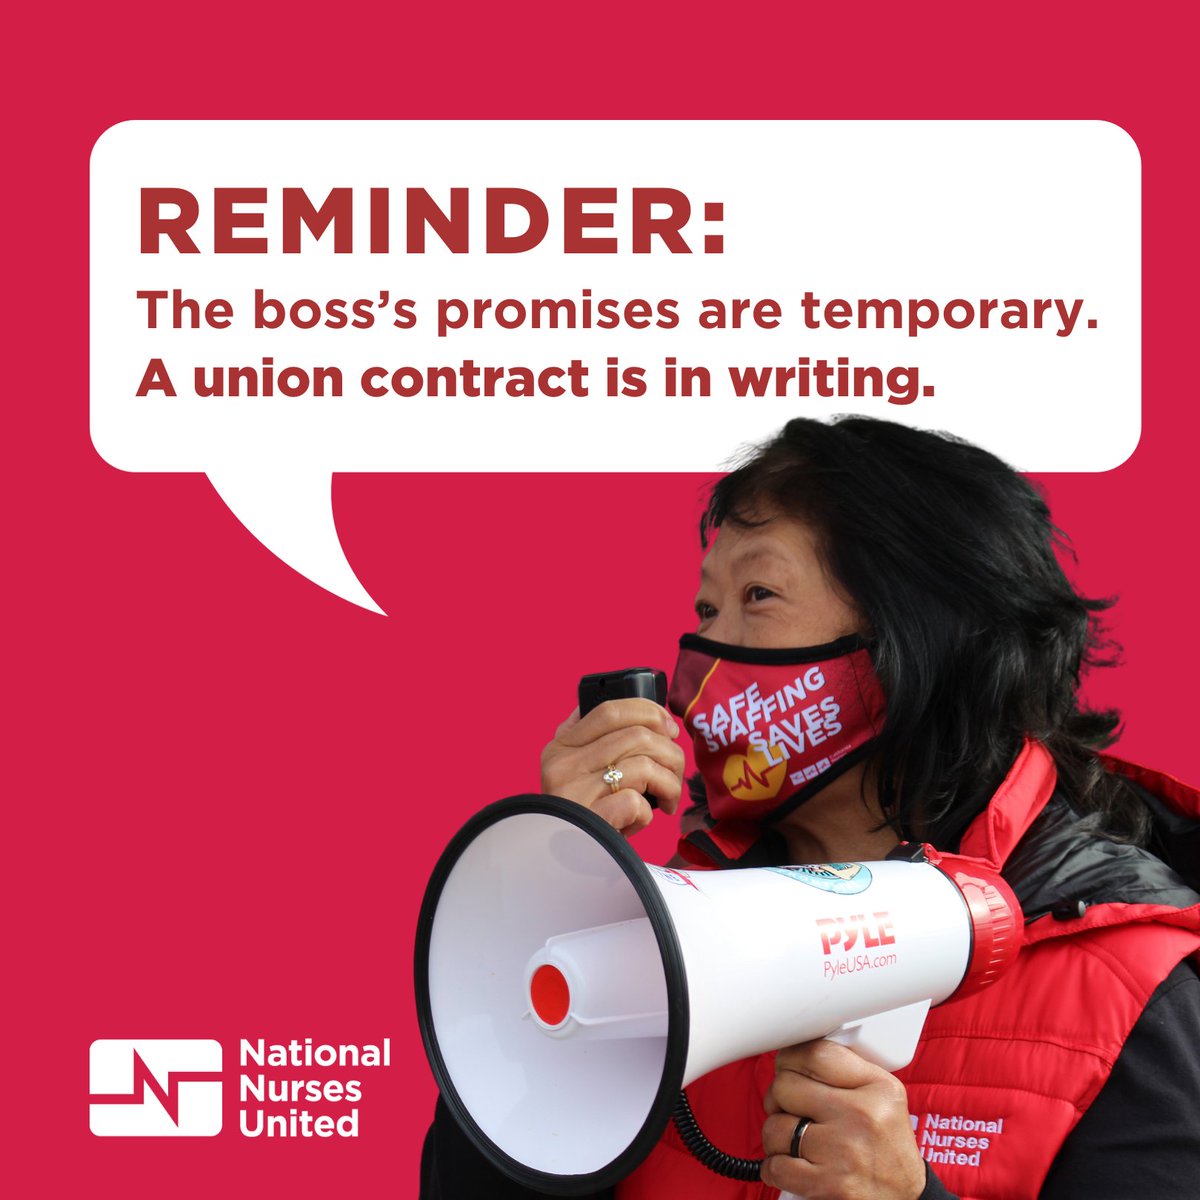 A #UnionContract stands the test of time. There is strength in solidarity. ✊🏽❤️